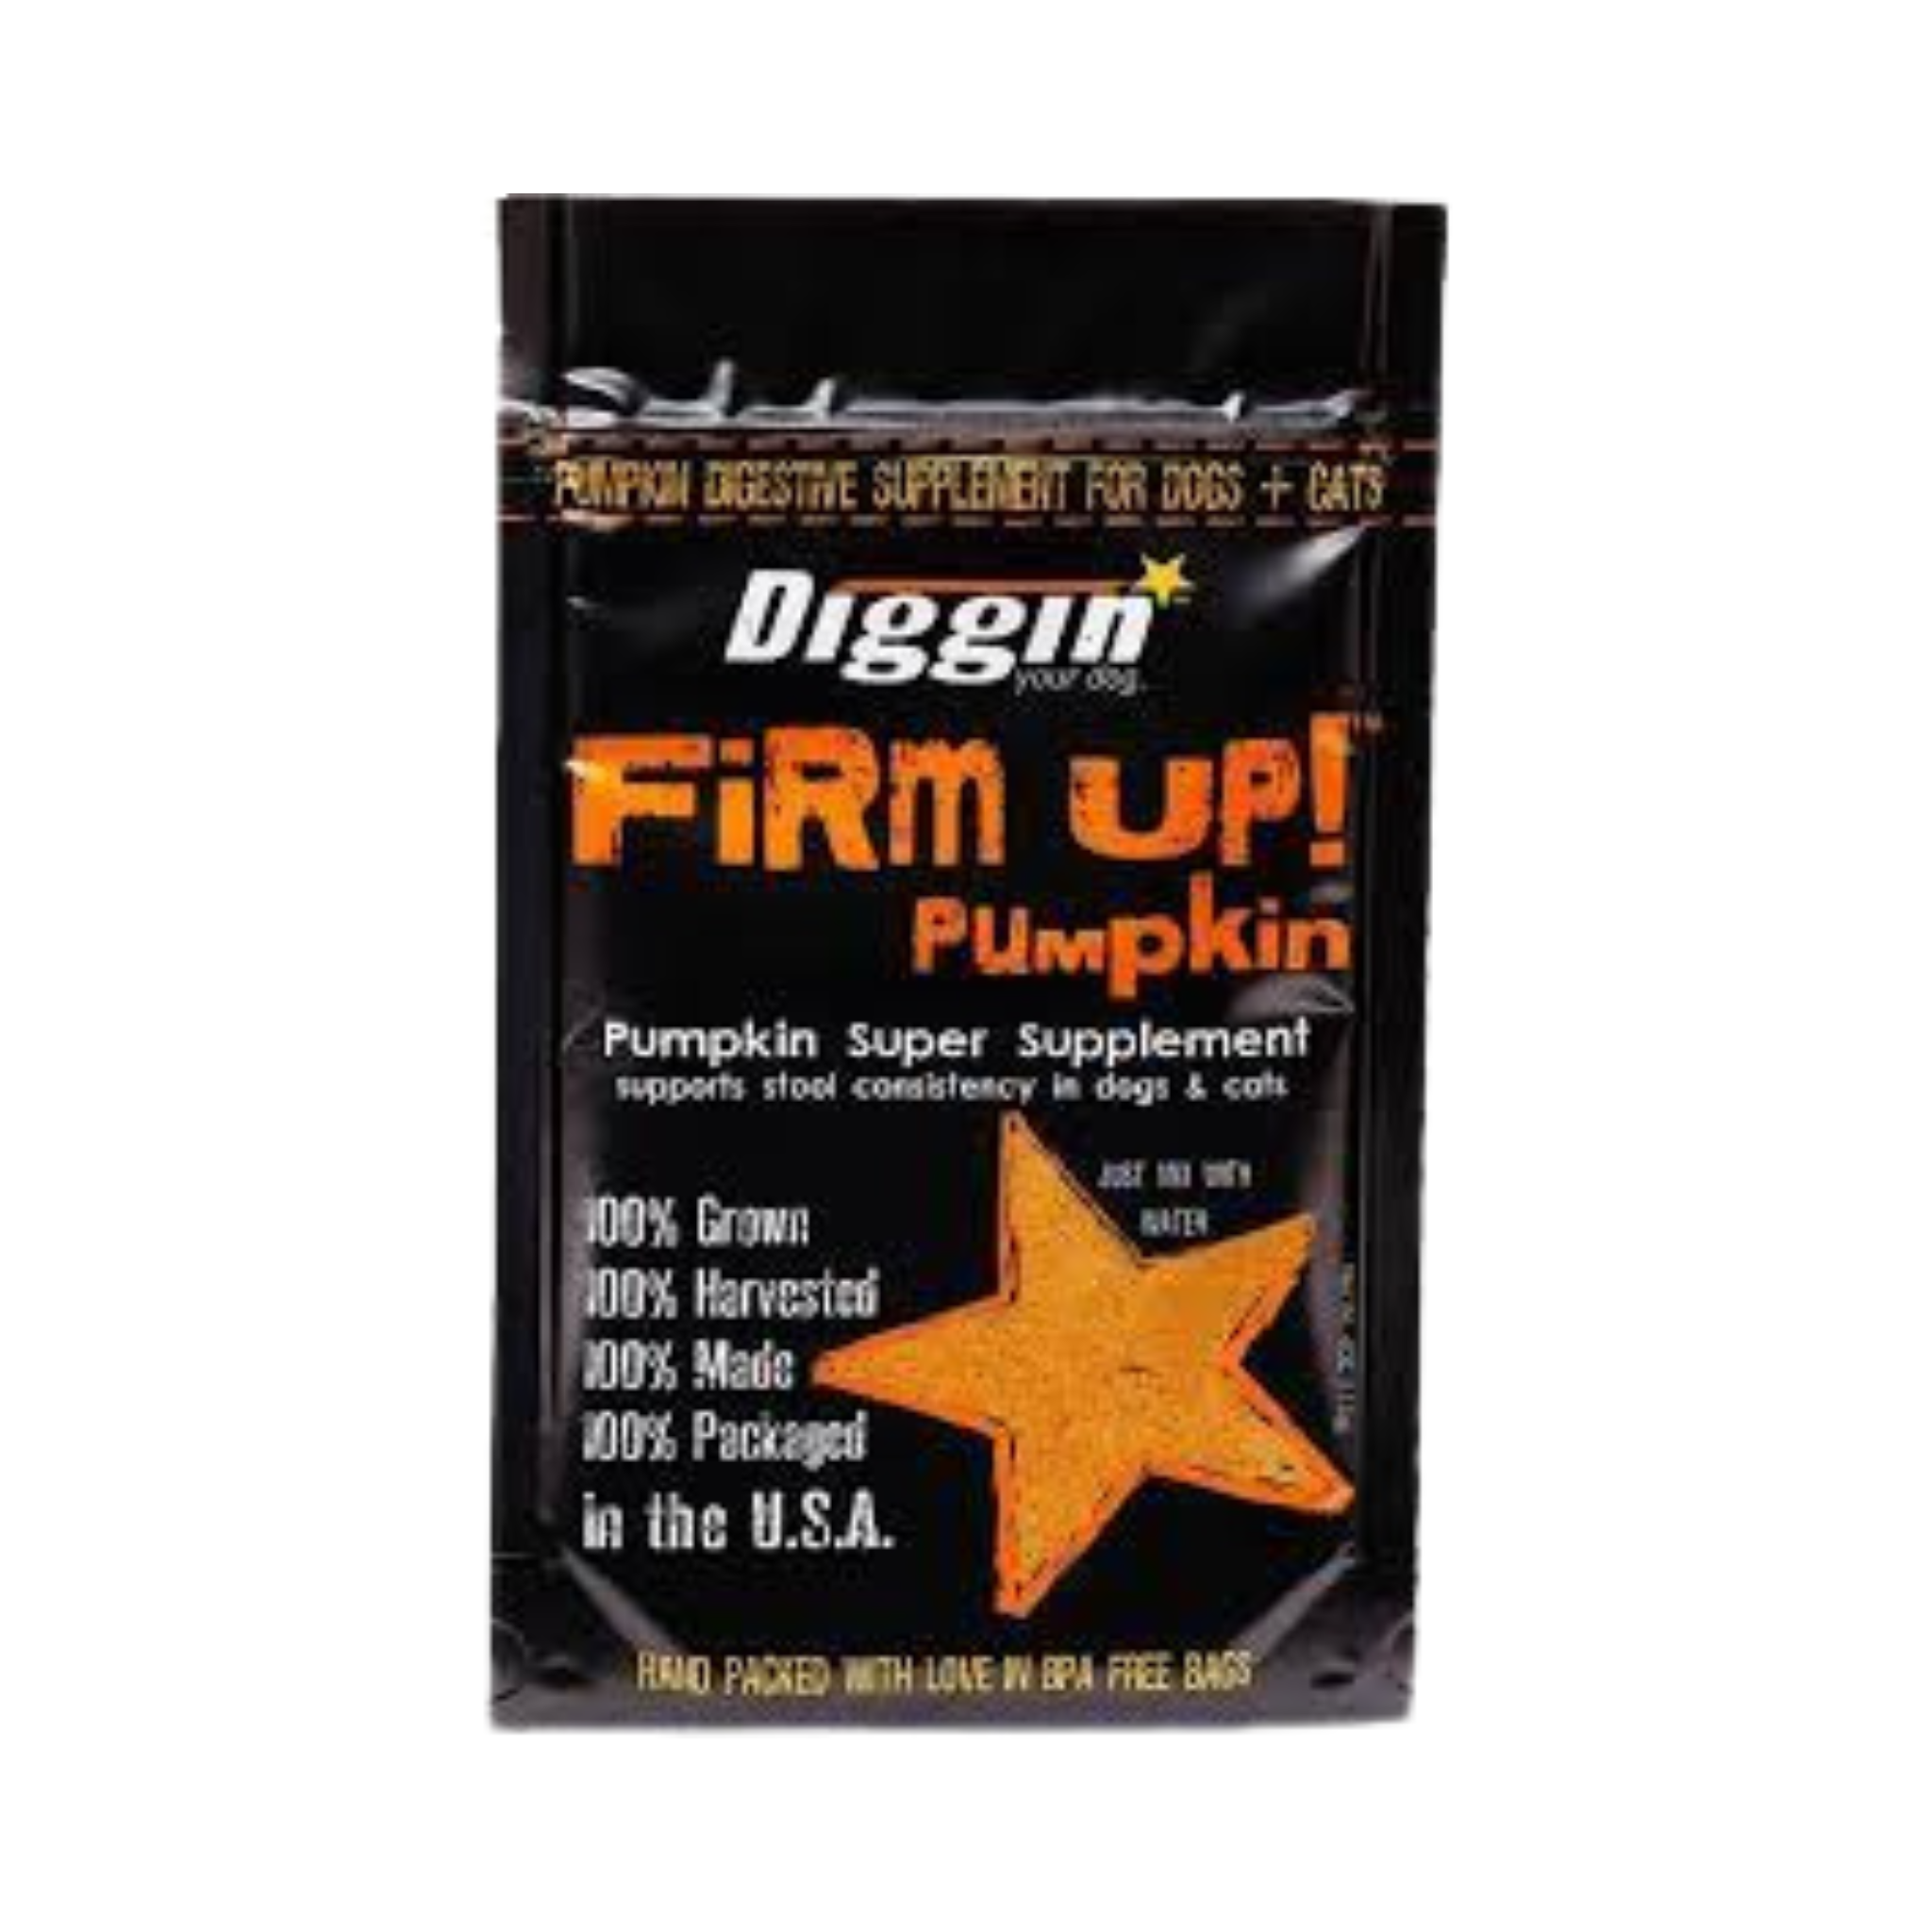 Diggin Firm Up! Pumpkin for Dogs & Cats